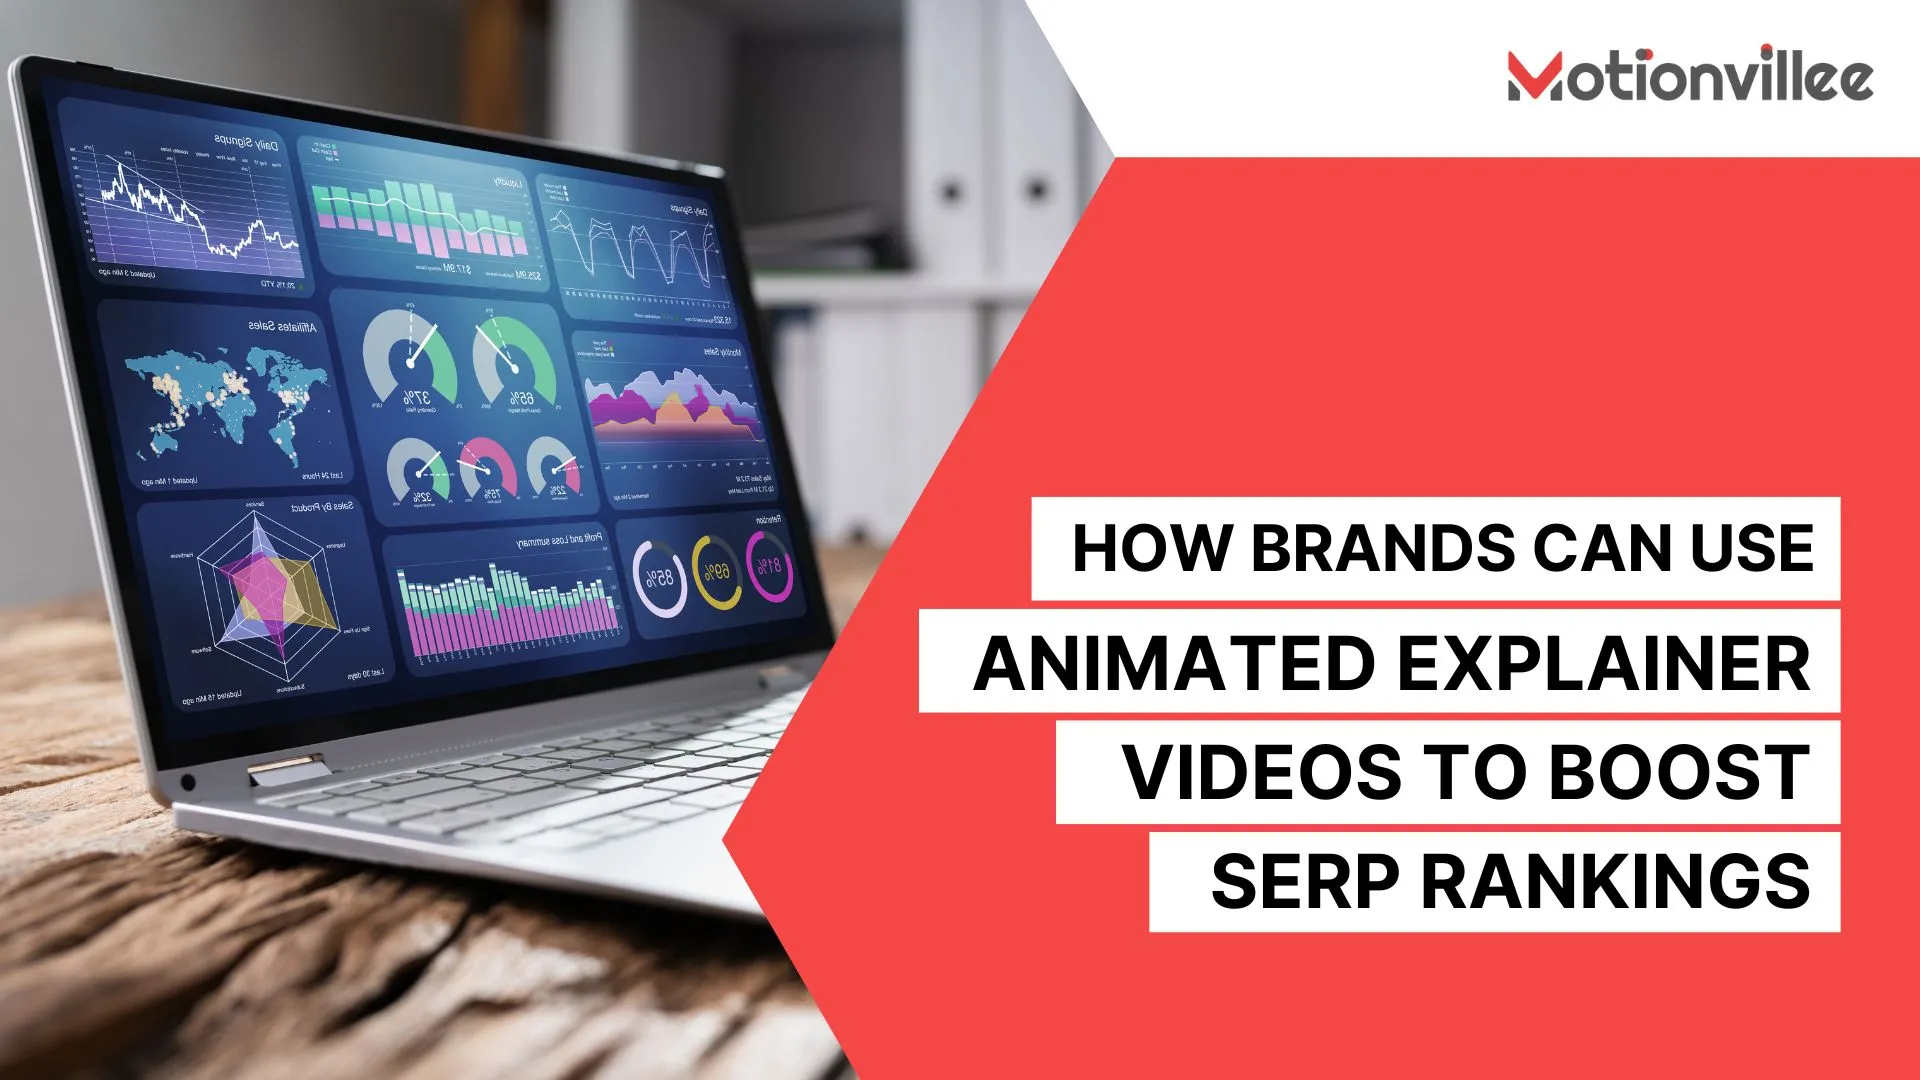 How to boost Google Ranking using Animated Explainer Video